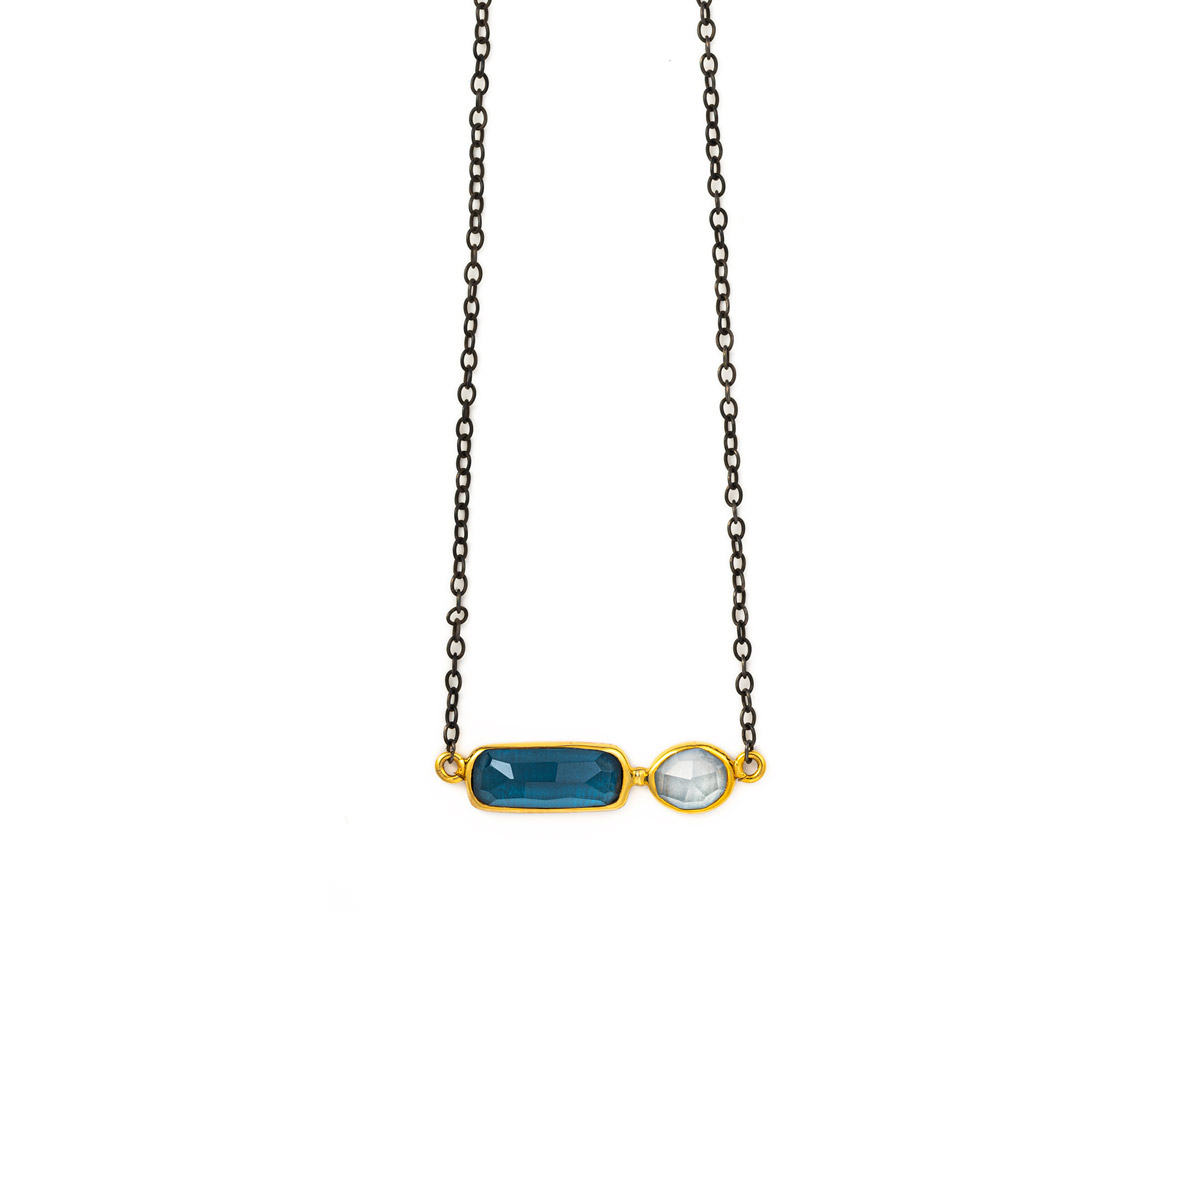 London Blue Topaz Aqua Marine Necklace - 18K Gold and Sterling Silver